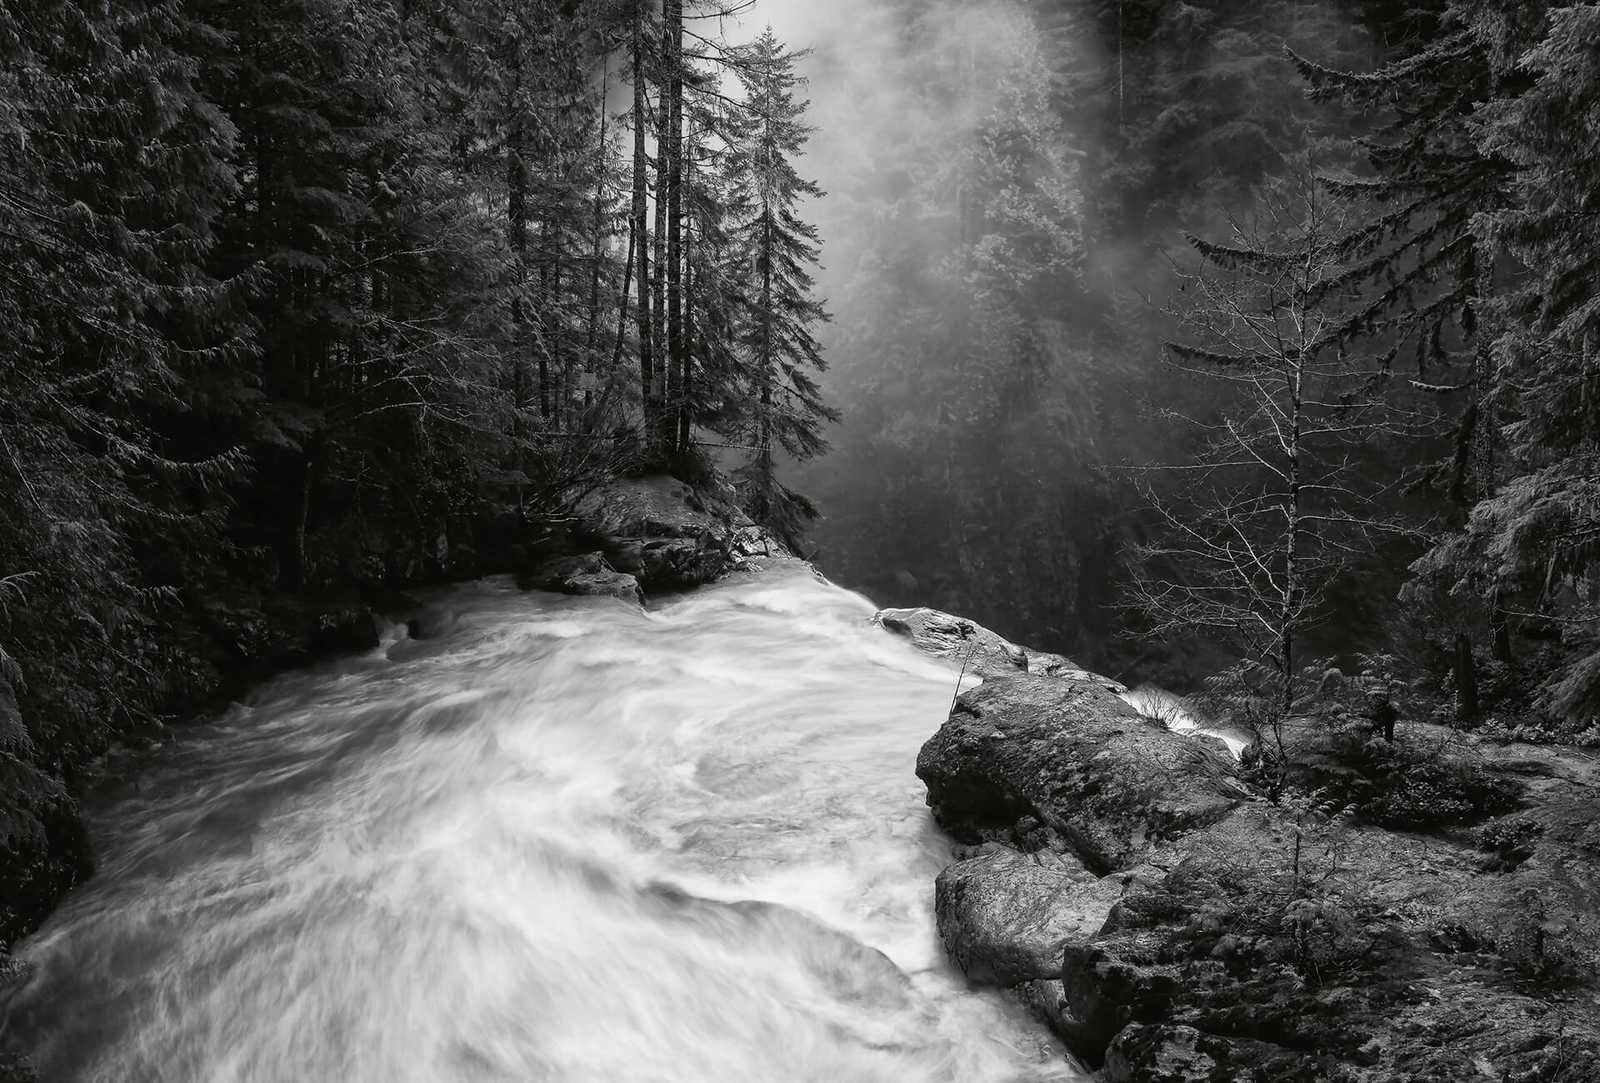         Photo wallpaper forest with waterfall - black, white, grey
    